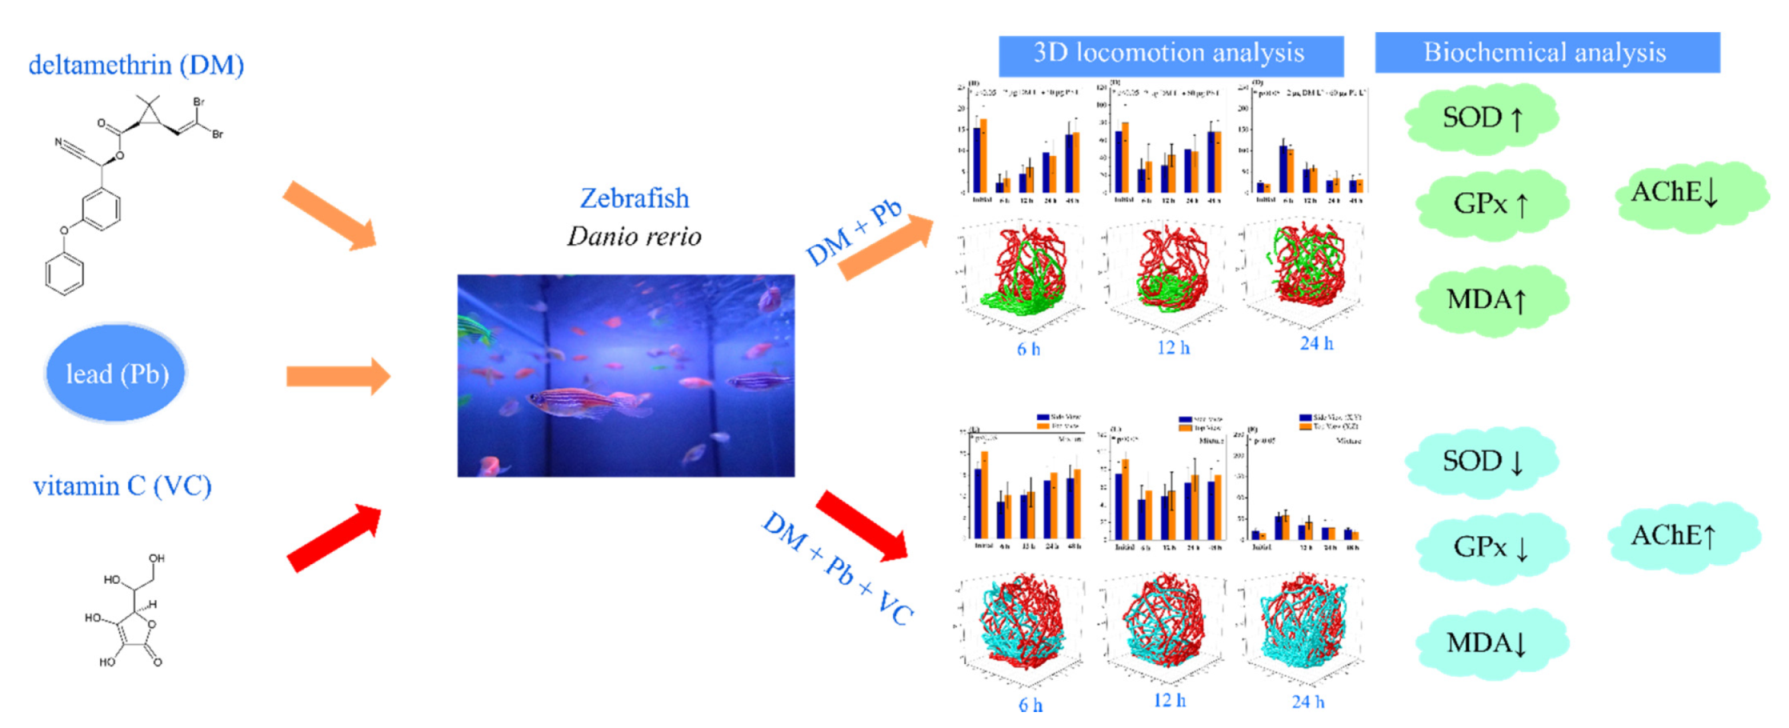 IJMS | Free Full-Text | Vitamin C Mitigates Oxidative Stress and Behavioral  Impairments Induced by Deltamethrin and Lead Toxicity in Zebrafish